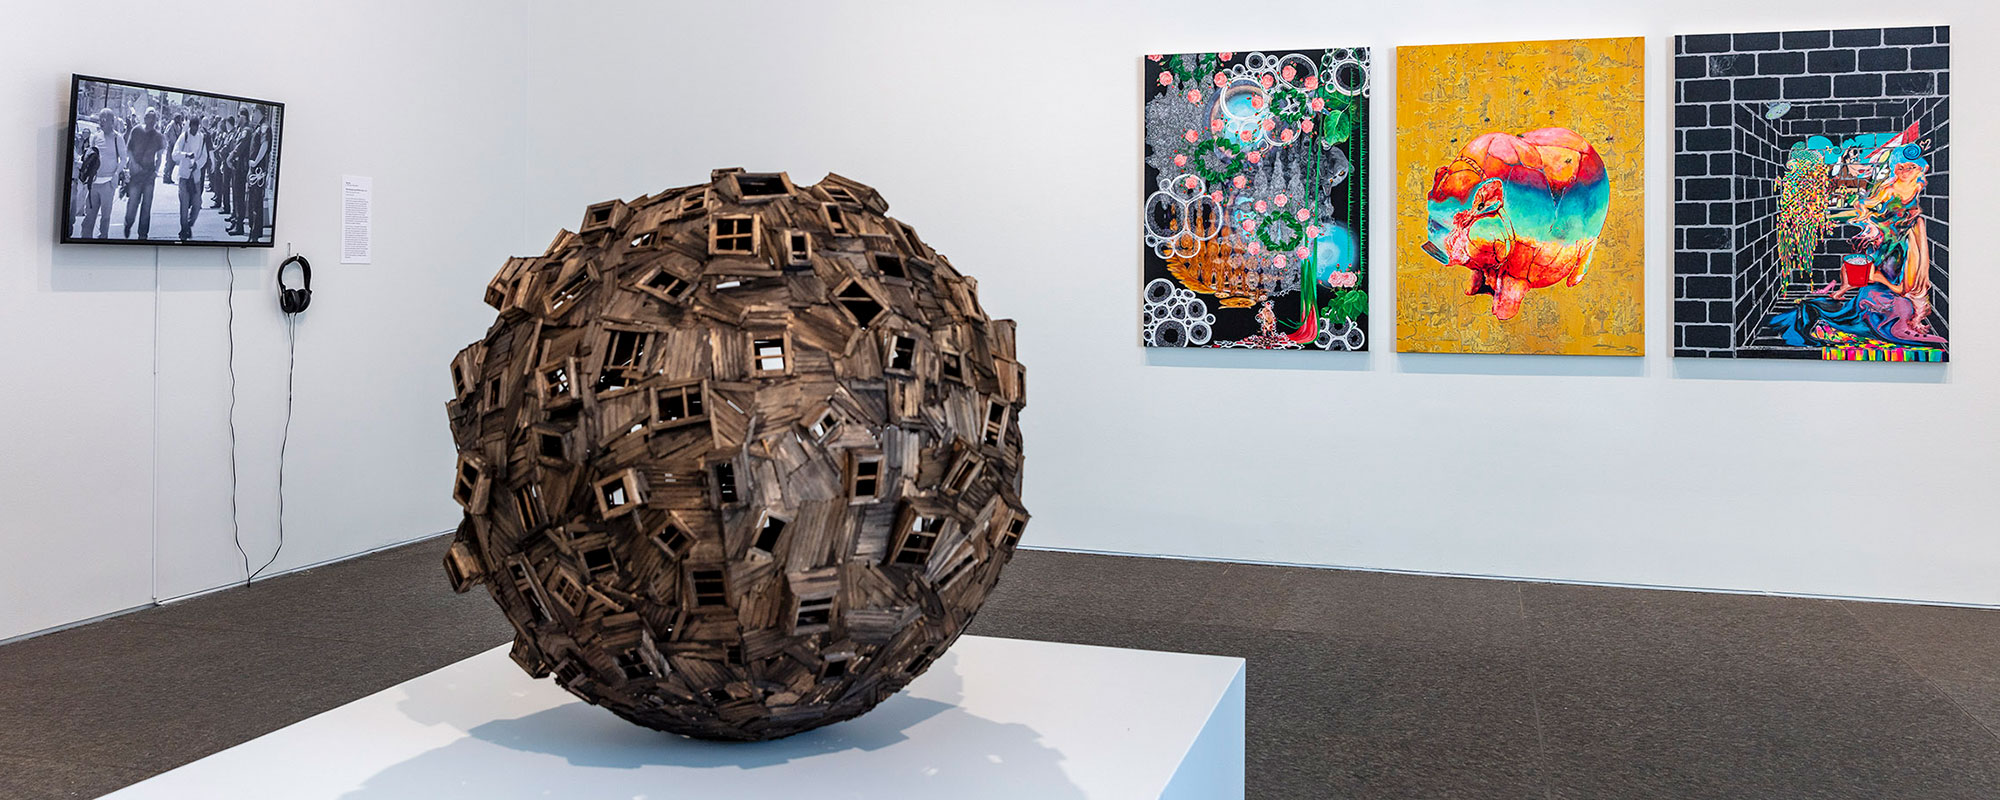 A view of an art gallery with a wooden sphere in the foreground